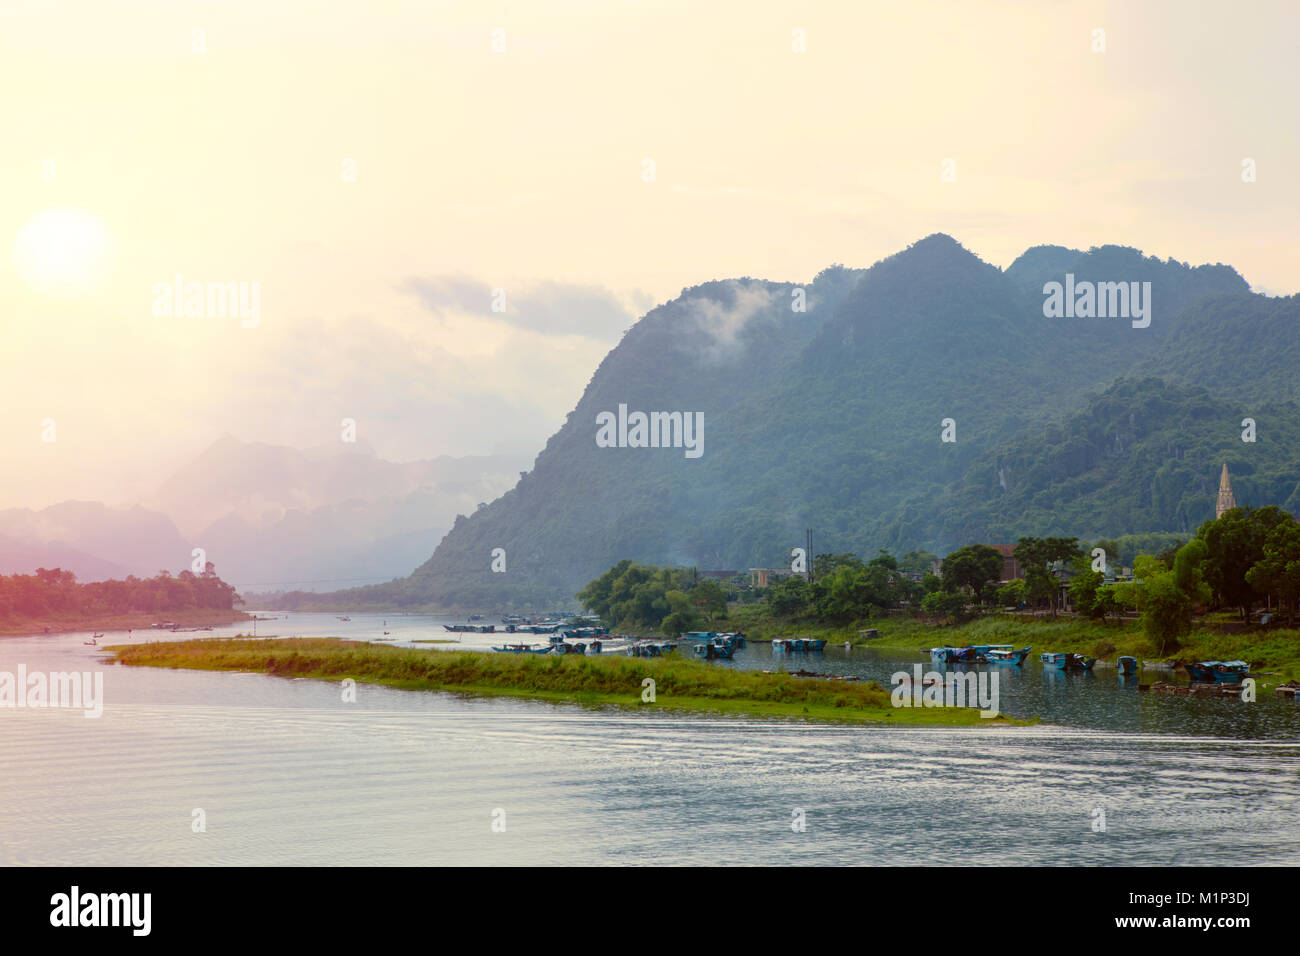 Sunset over the Son River in the Phong Nha Ke Bang National Park, Quang Binh, Vietnam, Indochina, Southeast Asia, Asia Stock Photo